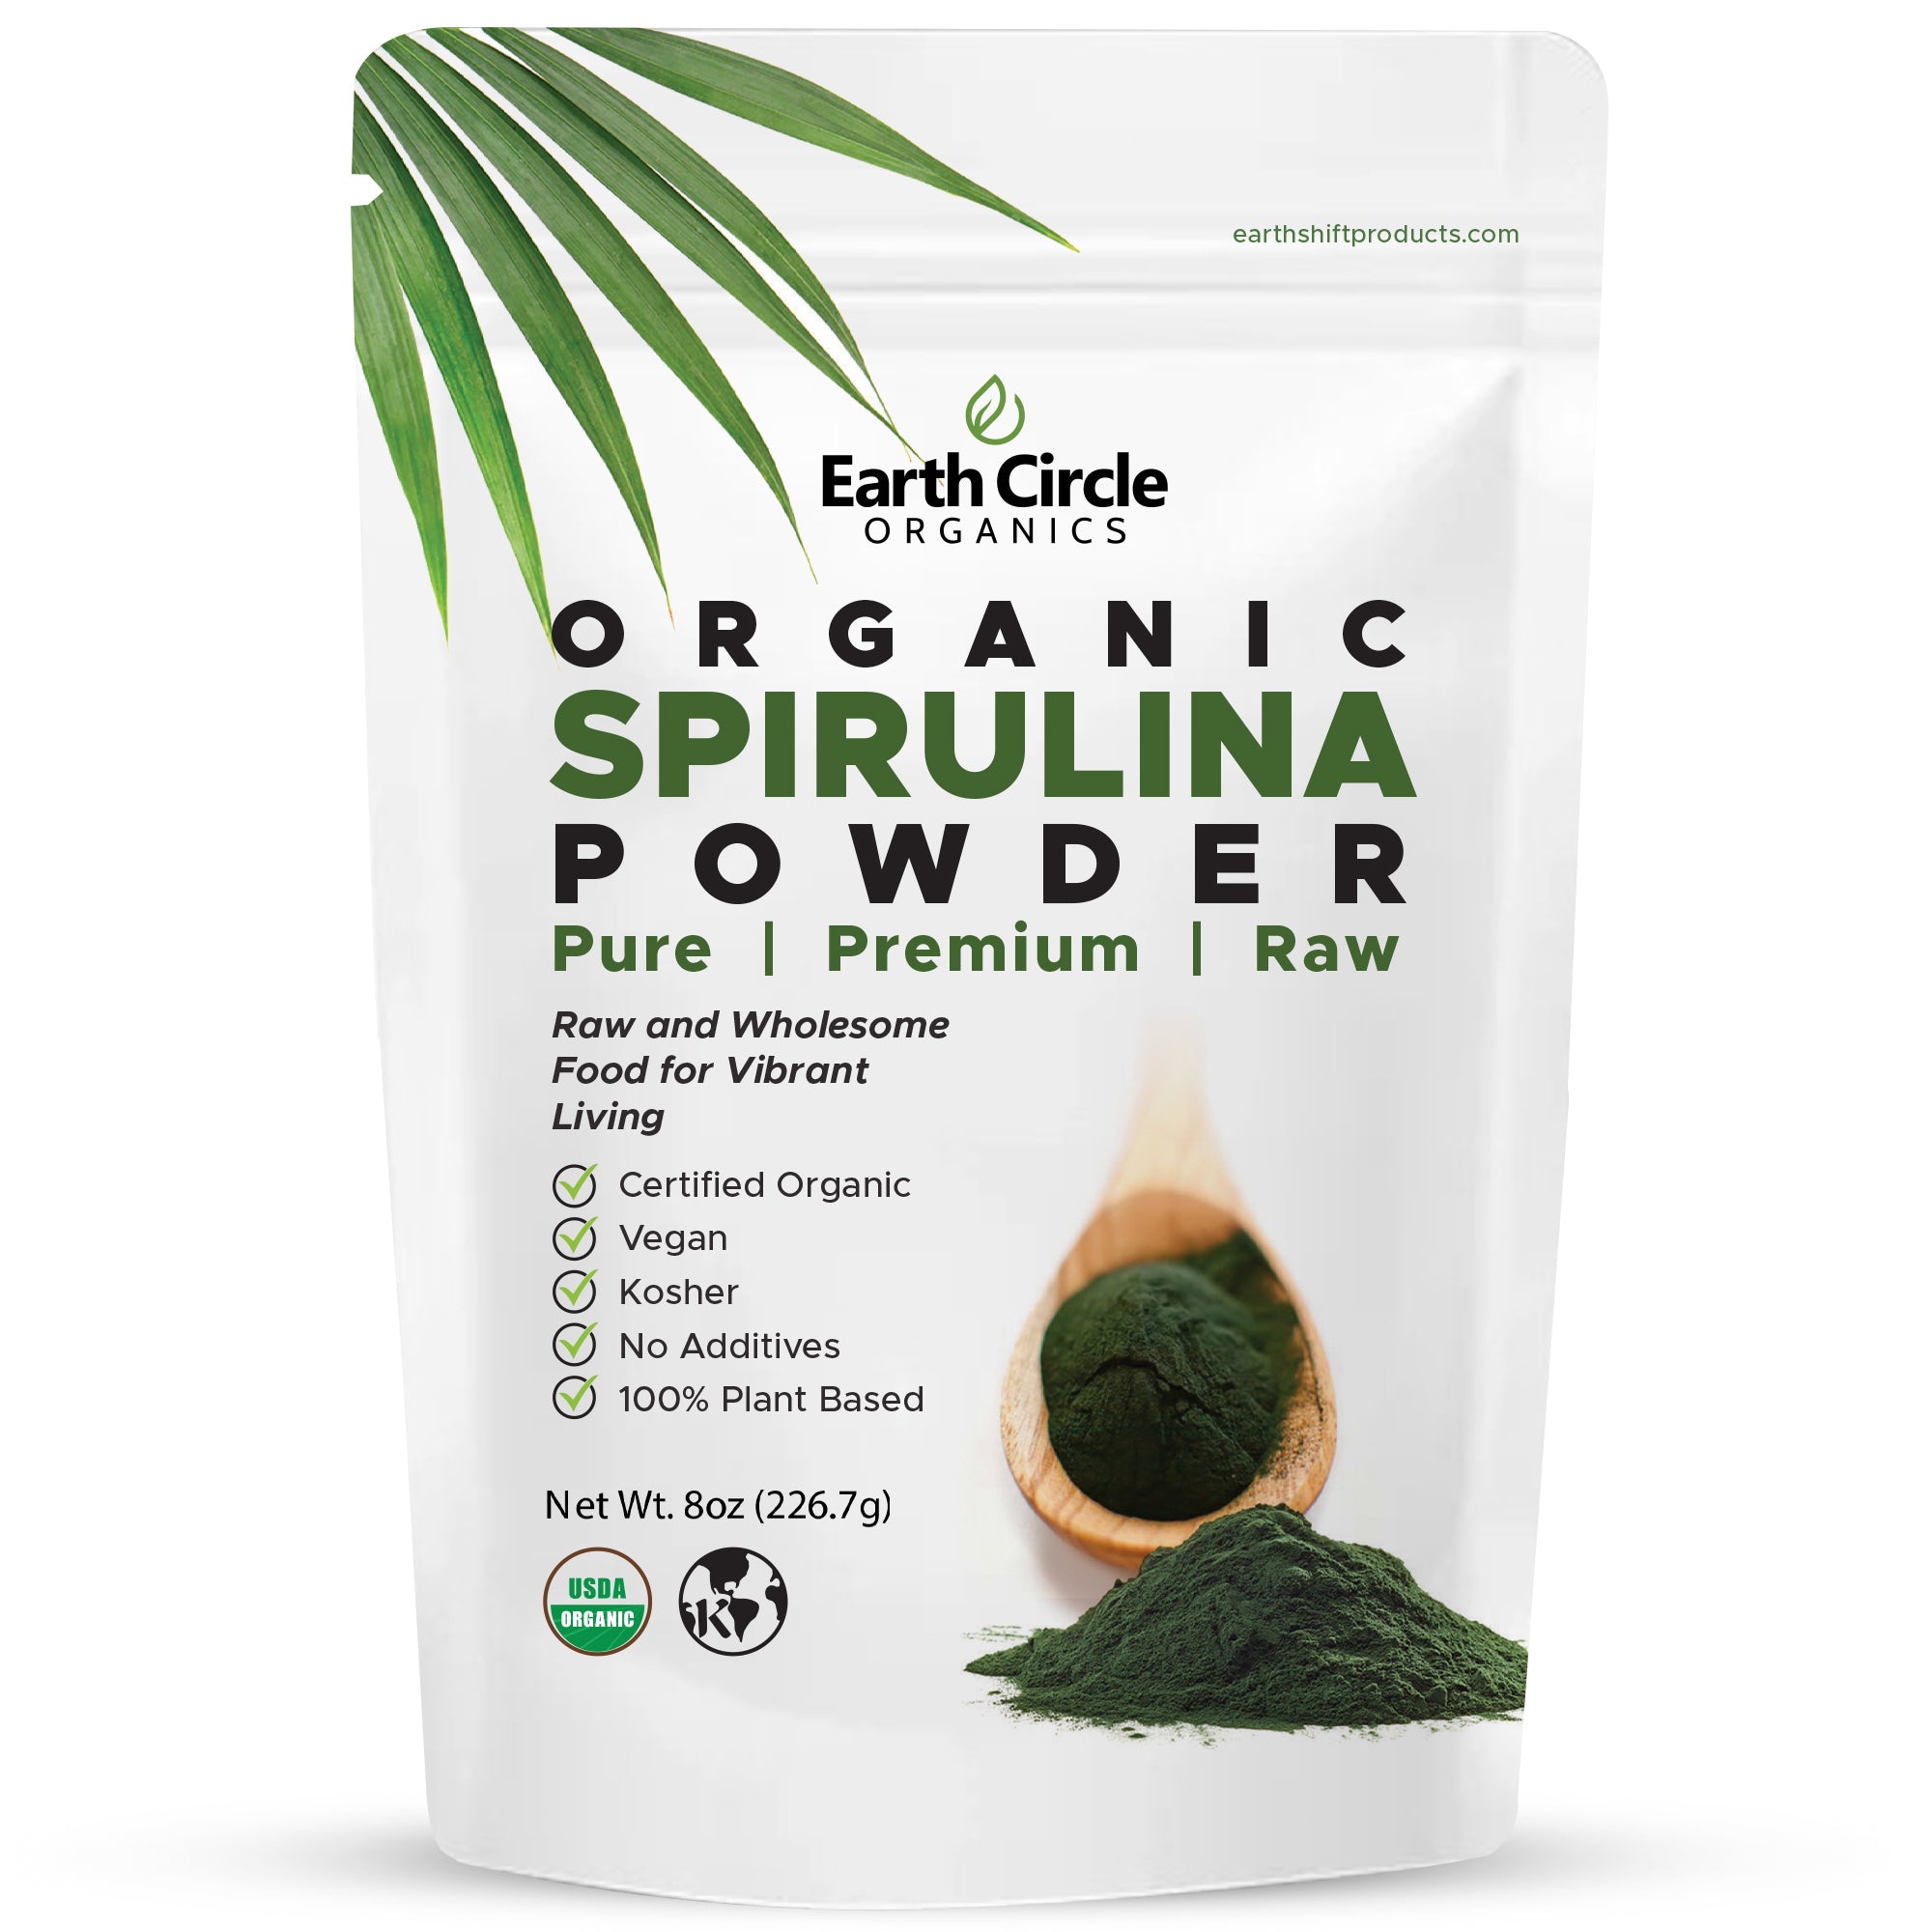 Earth Circle Organics Spirulina Powder | Certified Organic Superfood from Sustainable Farming Practices